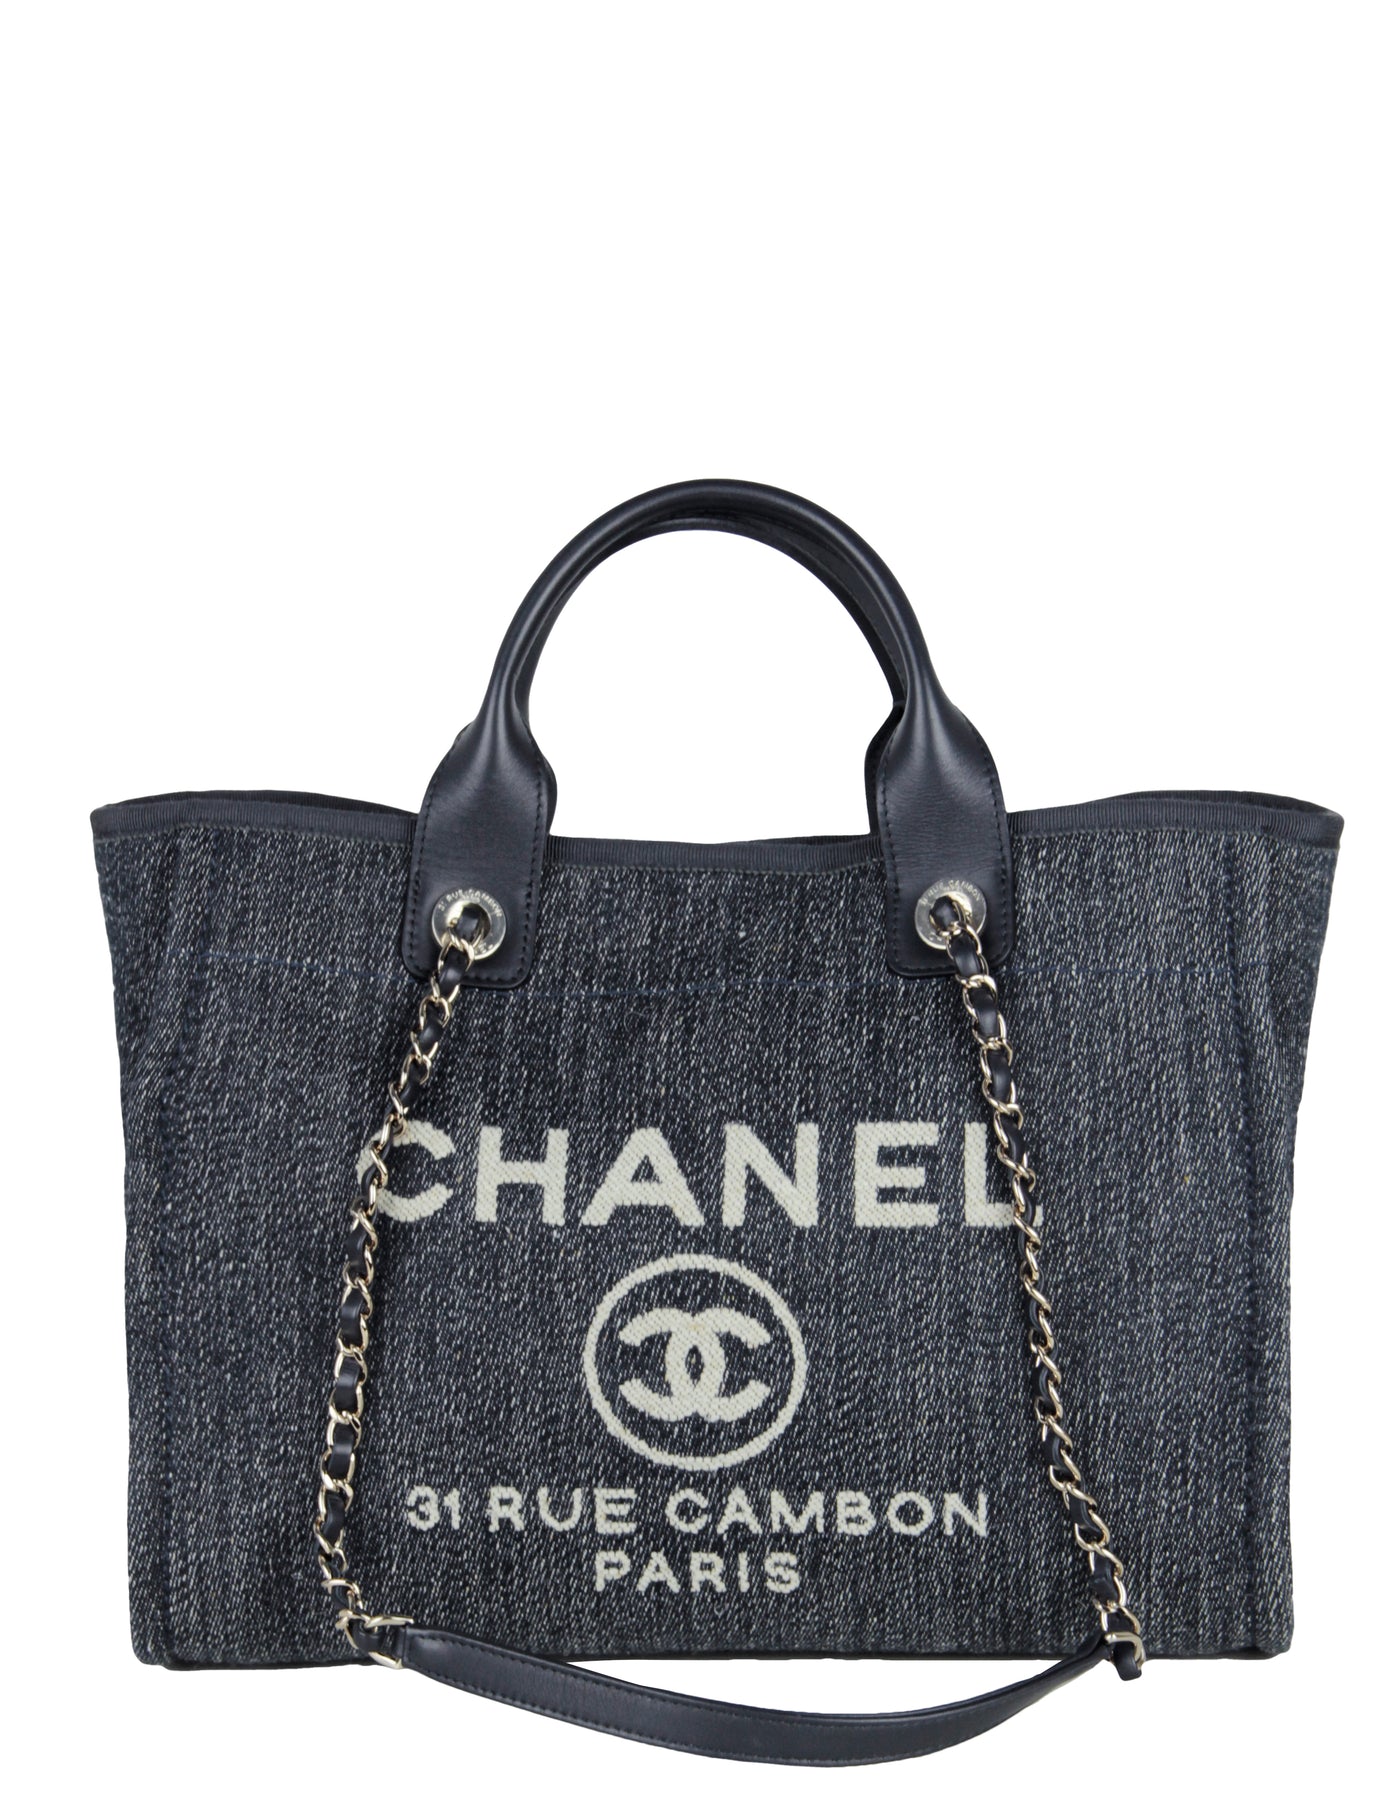 Chanel Mixed Fibers Small Deauville Tote Bag